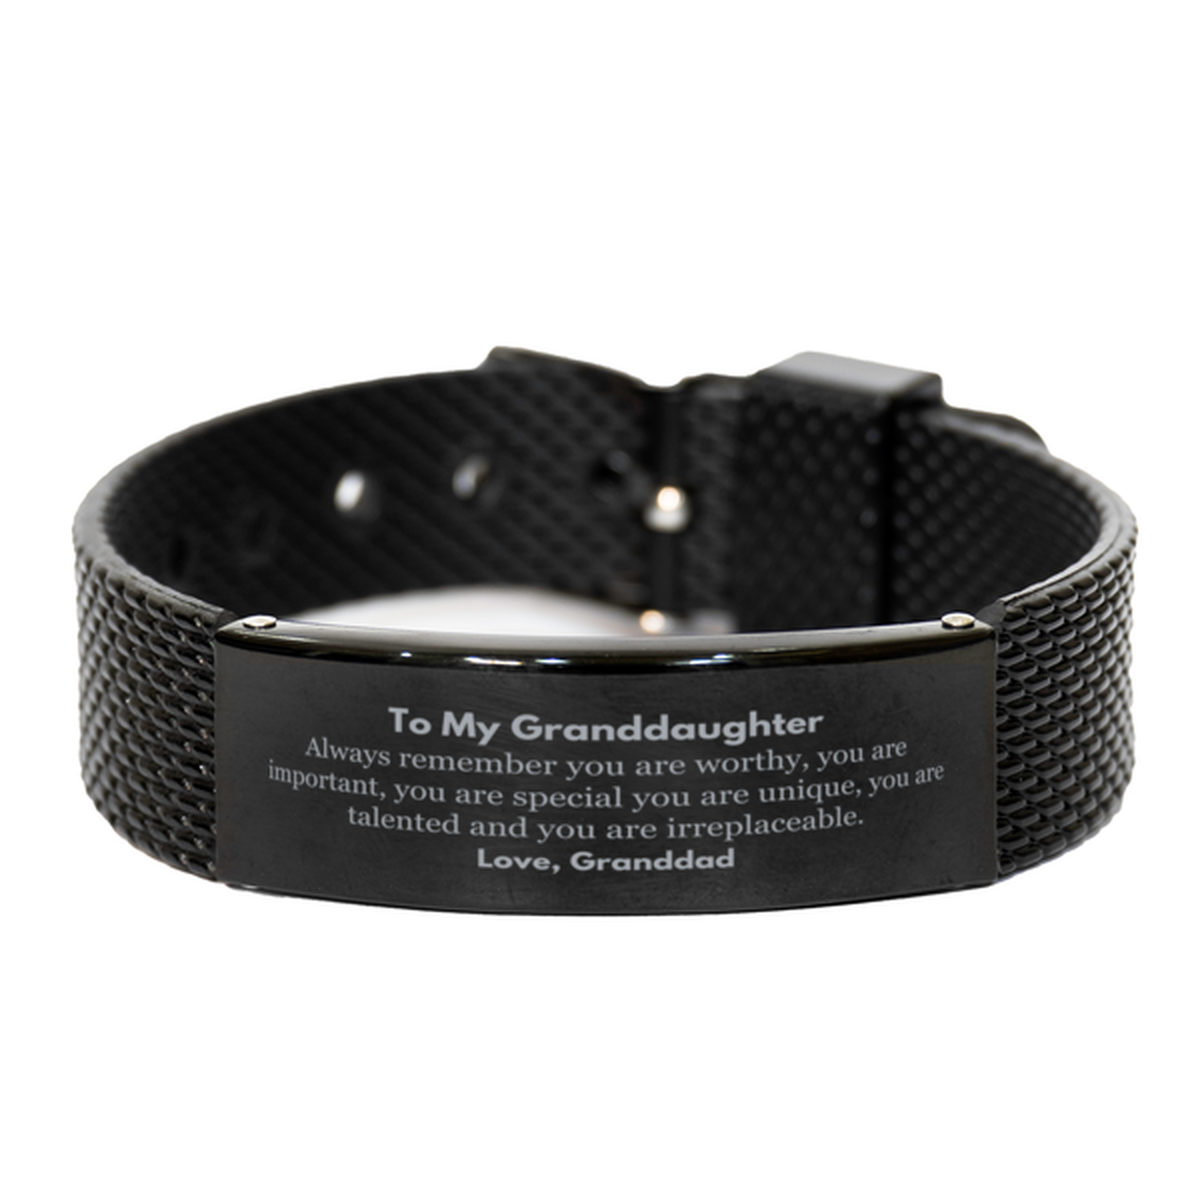 Granddaughter Birthday Gifts from Granddad, Inspirational Black Shark Mesh Bracelet for Granddaughter Christmas Graduation Gifts for Granddaughter Always remember you are worthy, you are important. Love, Granddad